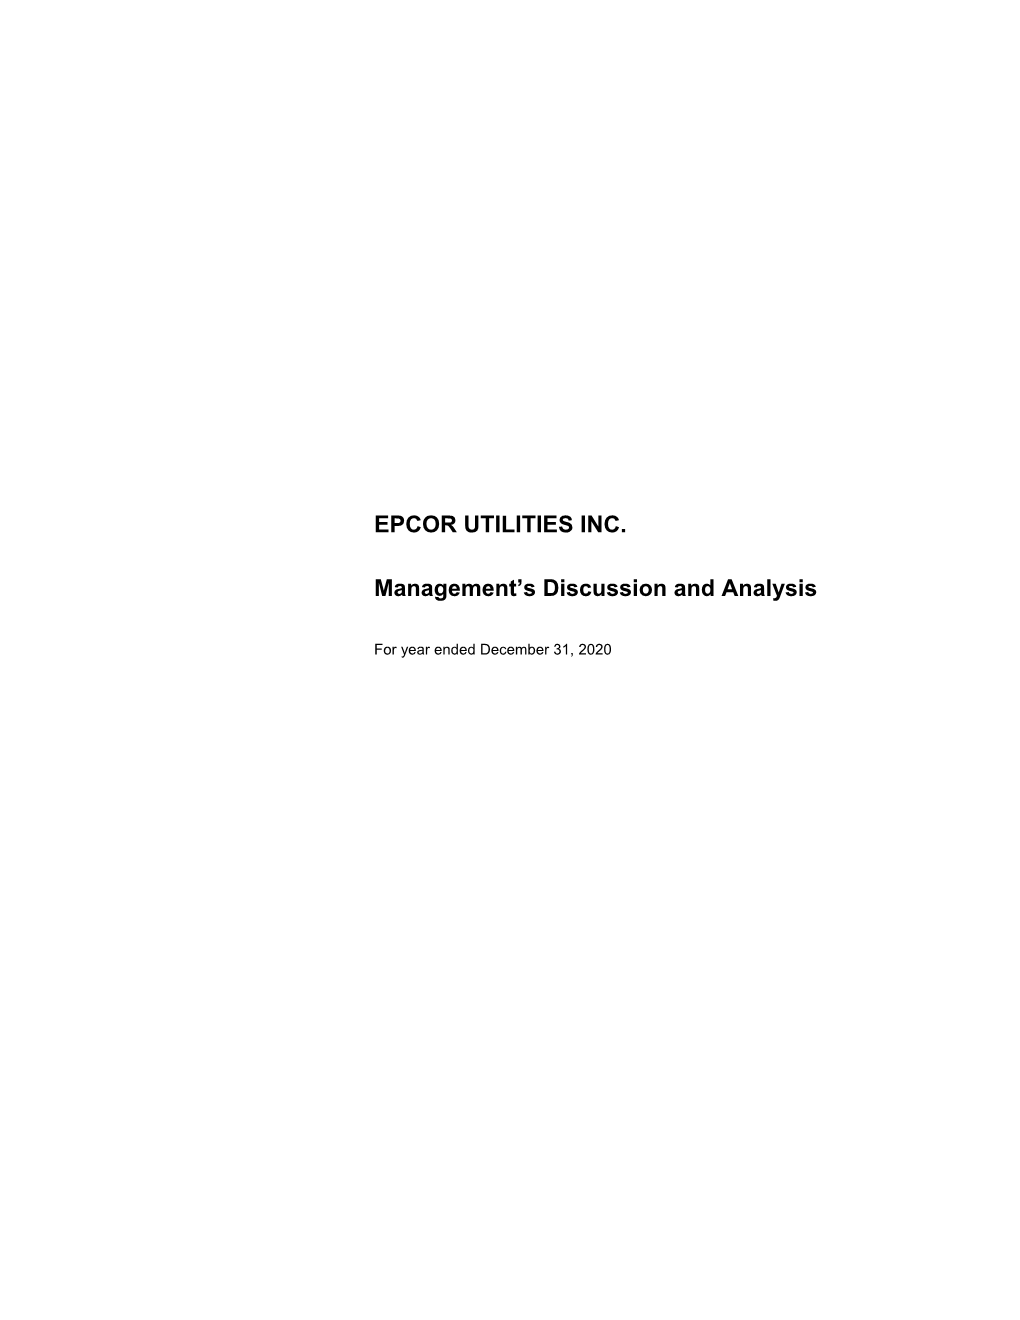 EPCOR UTILITIES INC. Management's Discussion And